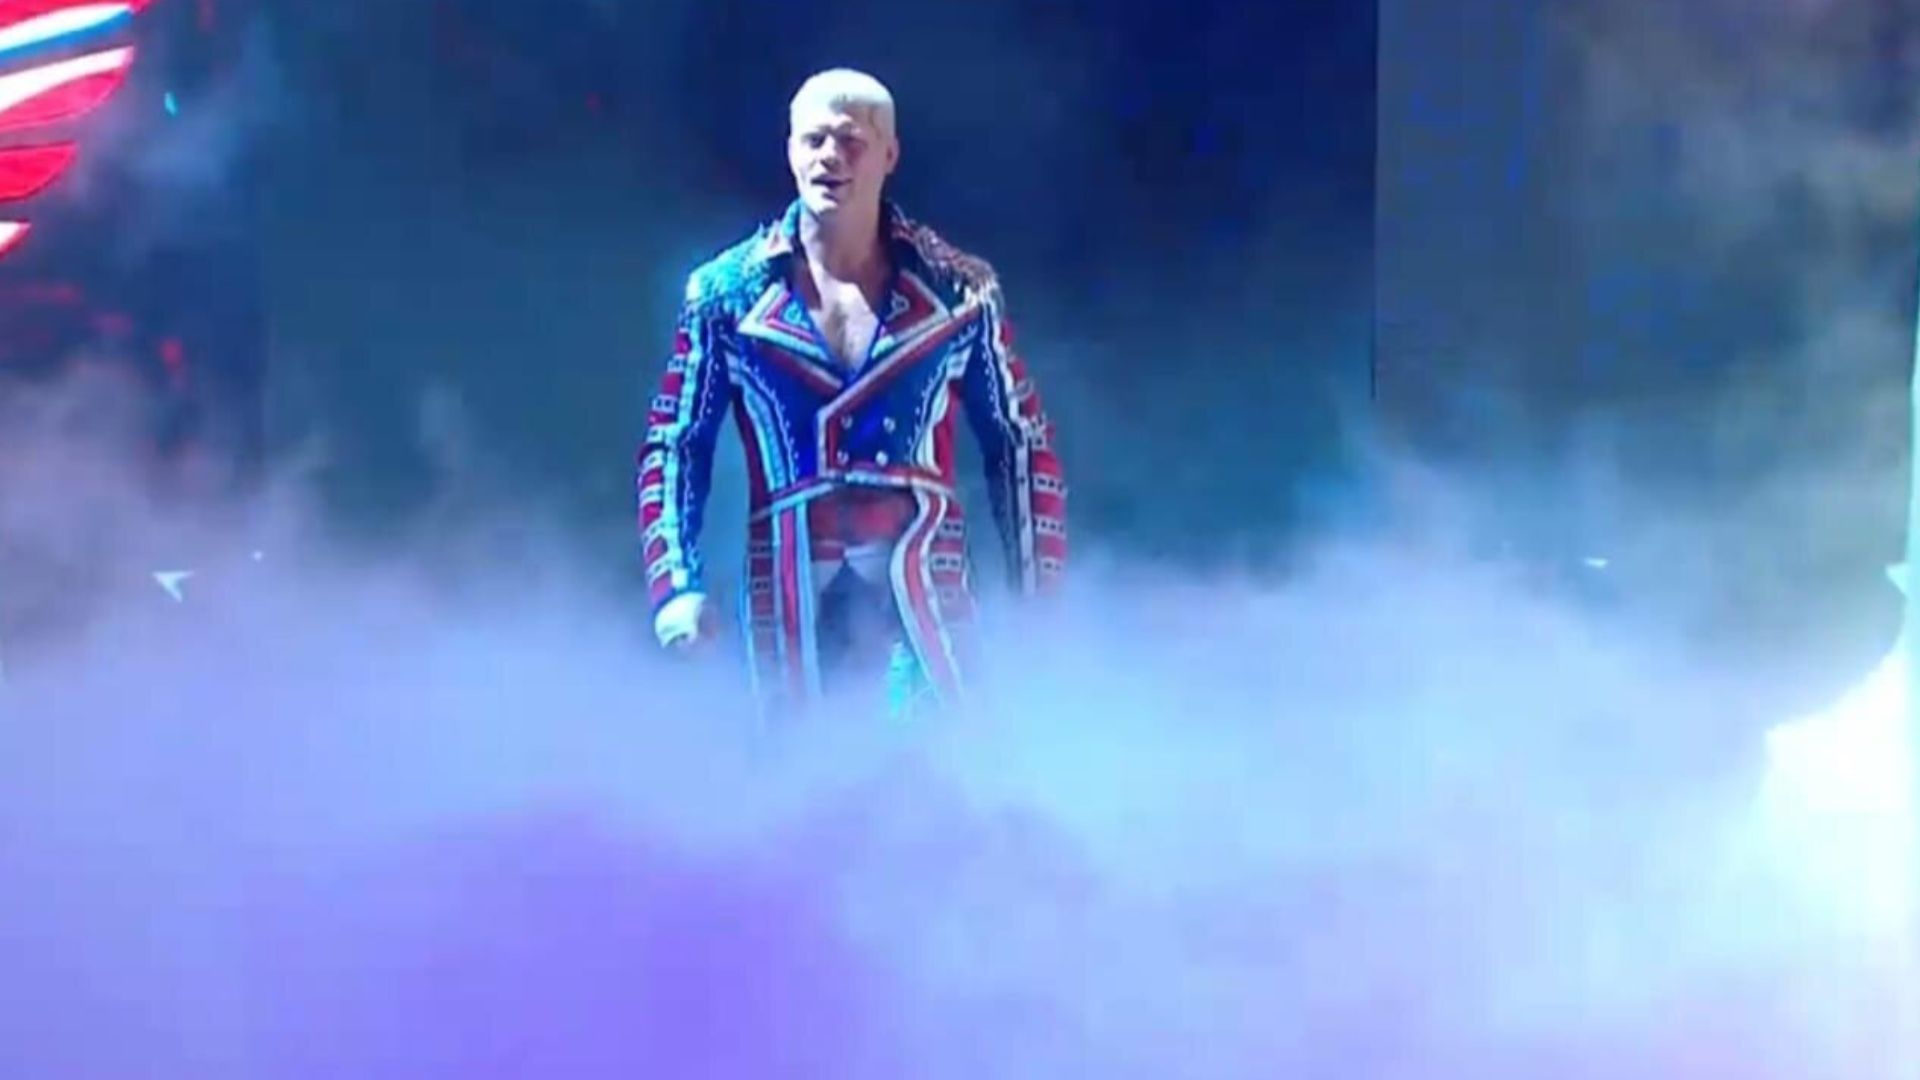 Cody Rhodes remains one of the most popular superstars on the WWE roster.